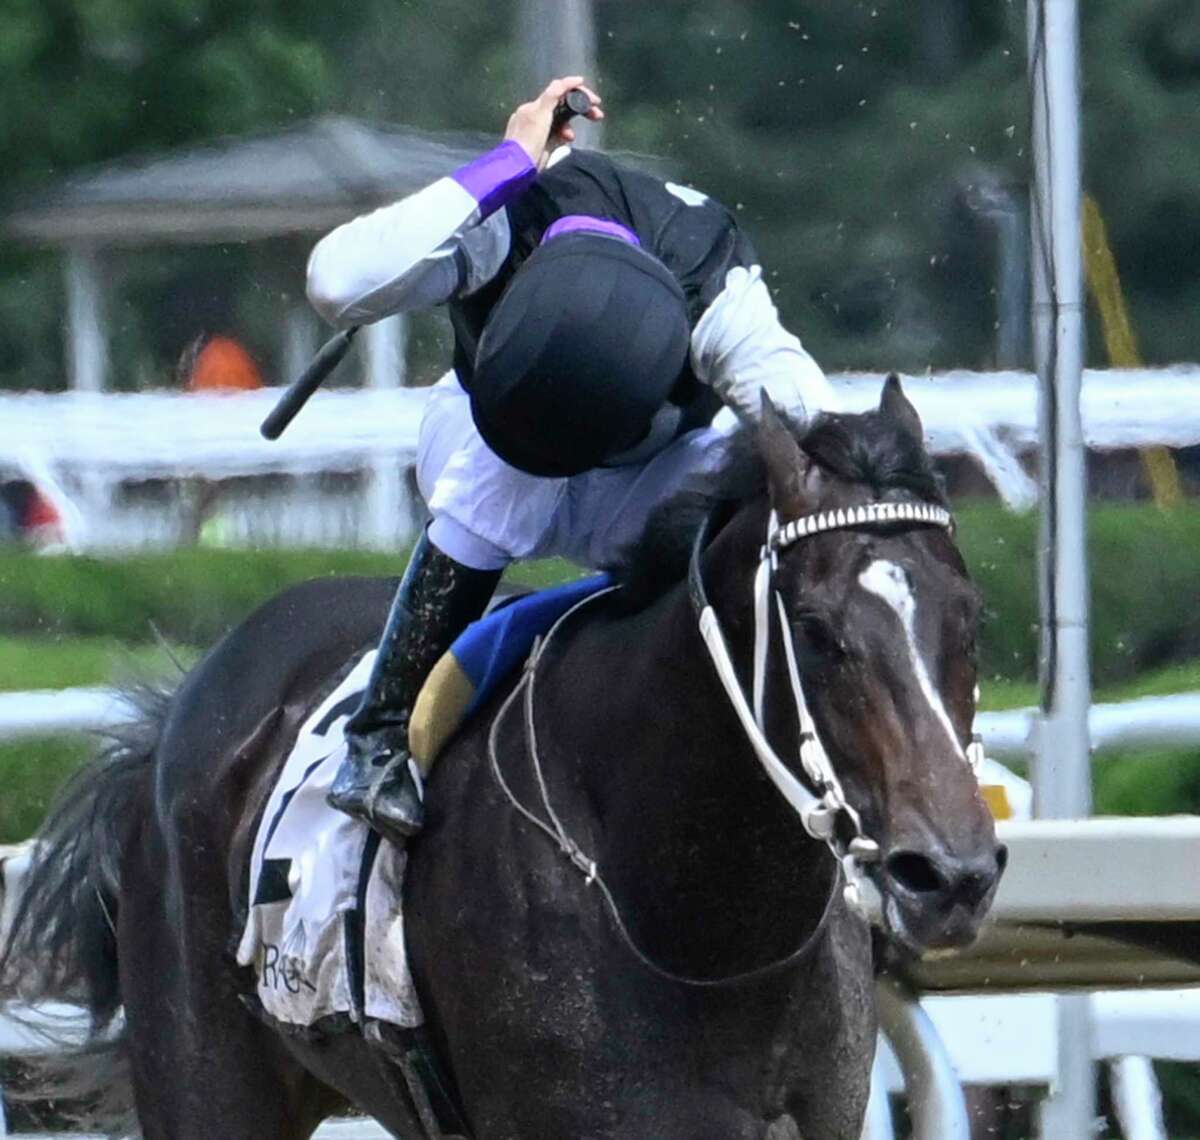 Jockey Gabriel Saez turns around in the saddle to look for the competition as Damon's Mound wins the 117th running of the Saratoga Special, a Grade II race at Saratoga Race Course on Saturday, Aug. 13, 2022.